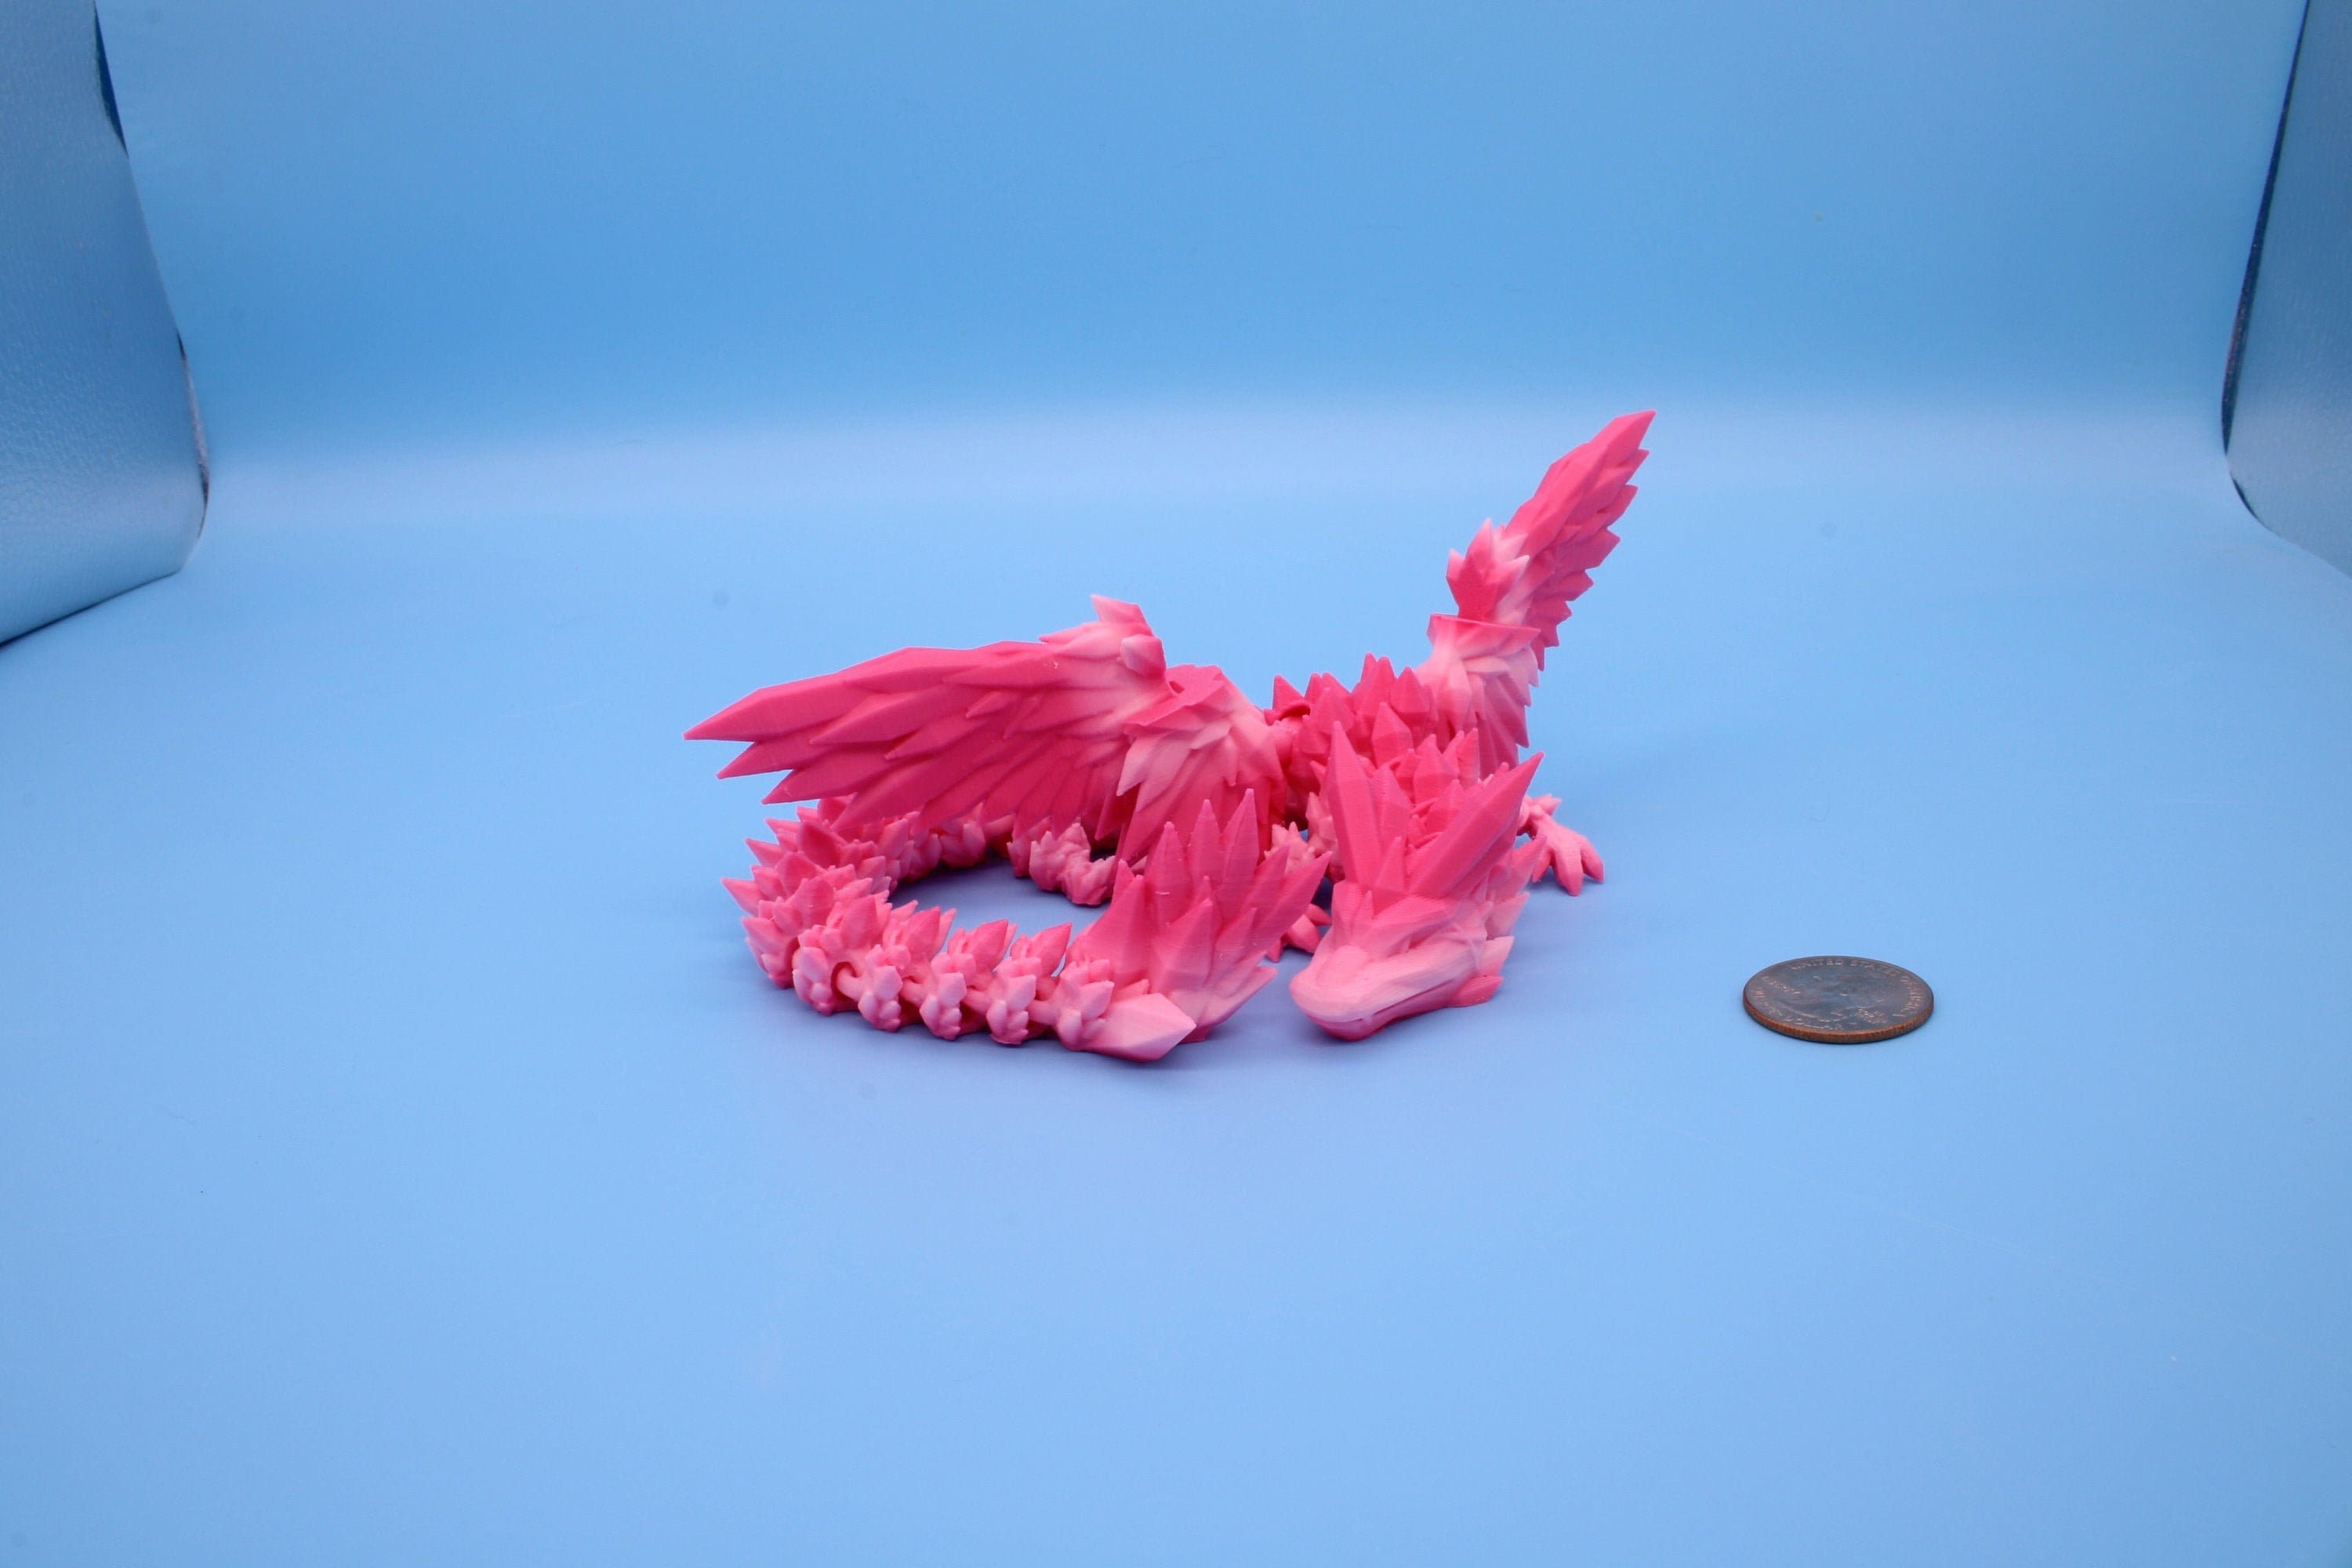 3D Printed Articulating Crystal Dragon / Fidget and Stress Relief